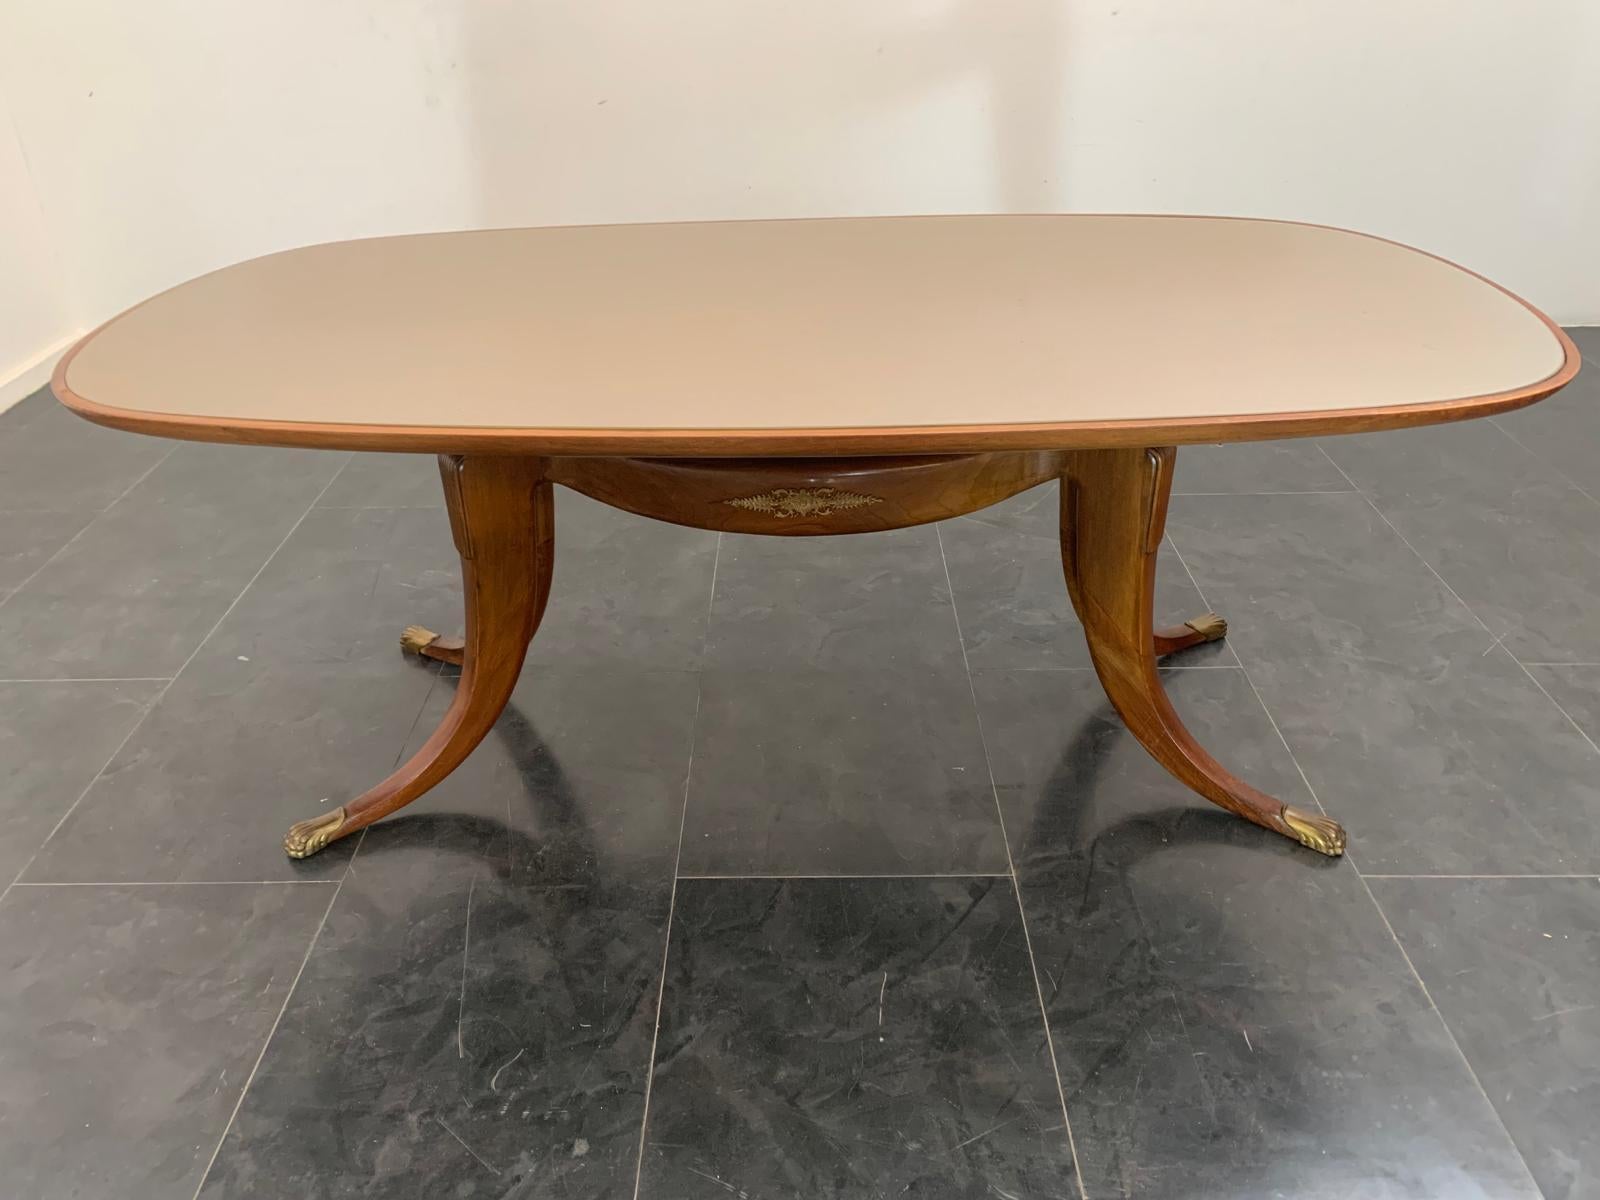 Excellent cabinet making for this table in solid rosewood. Four sabre legs with gilt bronze feline tips accommodate the gondola-shaped body in the centre, the whole supporting the oval top with back-treated glass. Gilded bronze details. The table